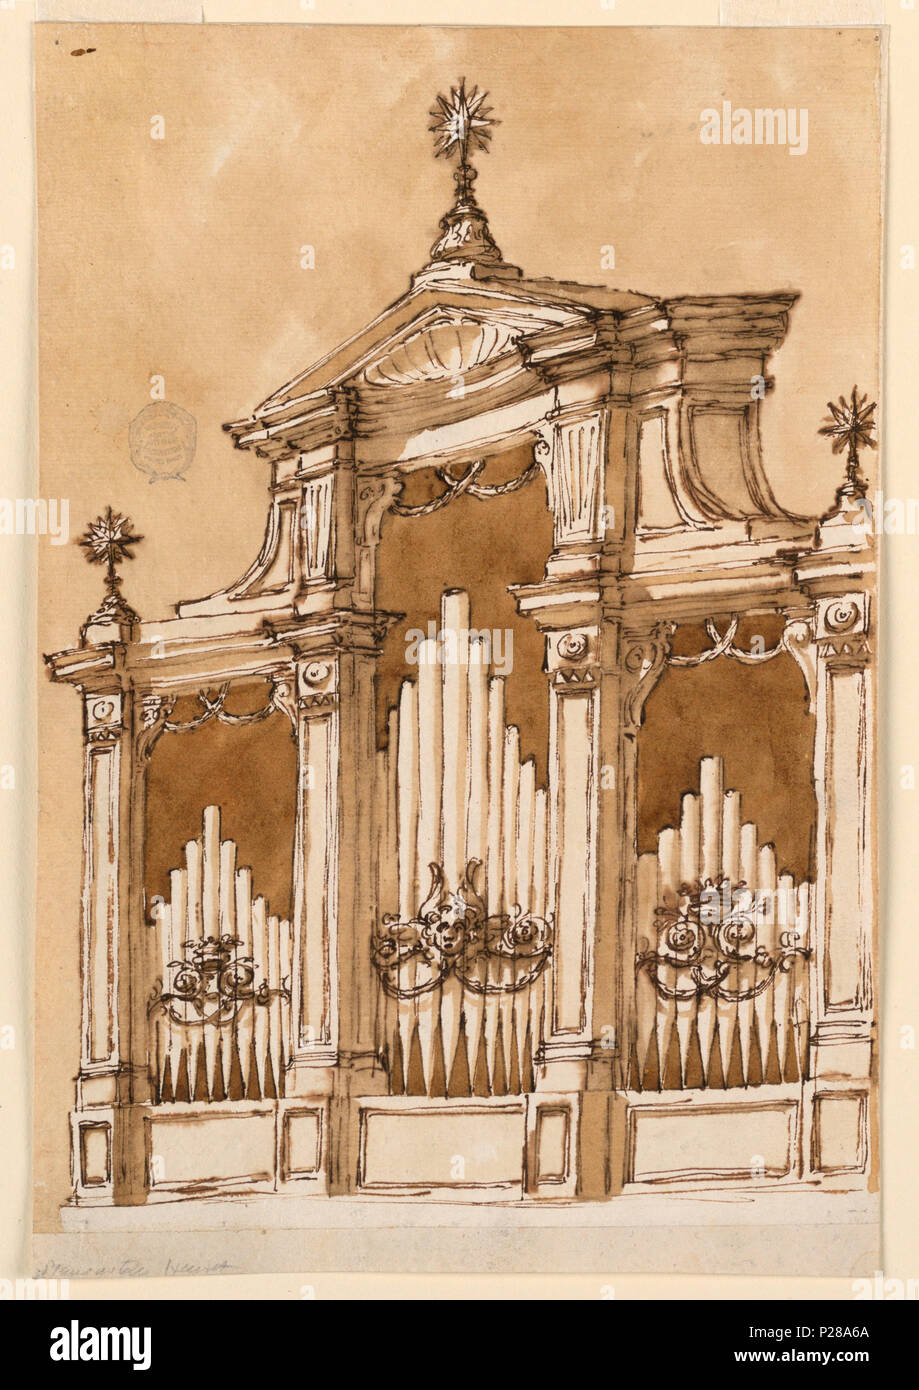 .  English: Drawing, Organ .  English: Vertical rectangle. Tripartite, the central part being higher than the lateral ones. The pipes are standing upon panels and have in front, in the central part a cherub with scrolls and festoons, in the lateral parts a crown above scrolls and festoons. Two crossed festoons are hanging into each part from teh upper edge. Above is a pediment over an entablature with a frieze, which is concave above the central part. The pediment is triangular with a shell inside. At the outside corners and on top of the pediment are starts supported by a foot. The wall is co Stock Photo